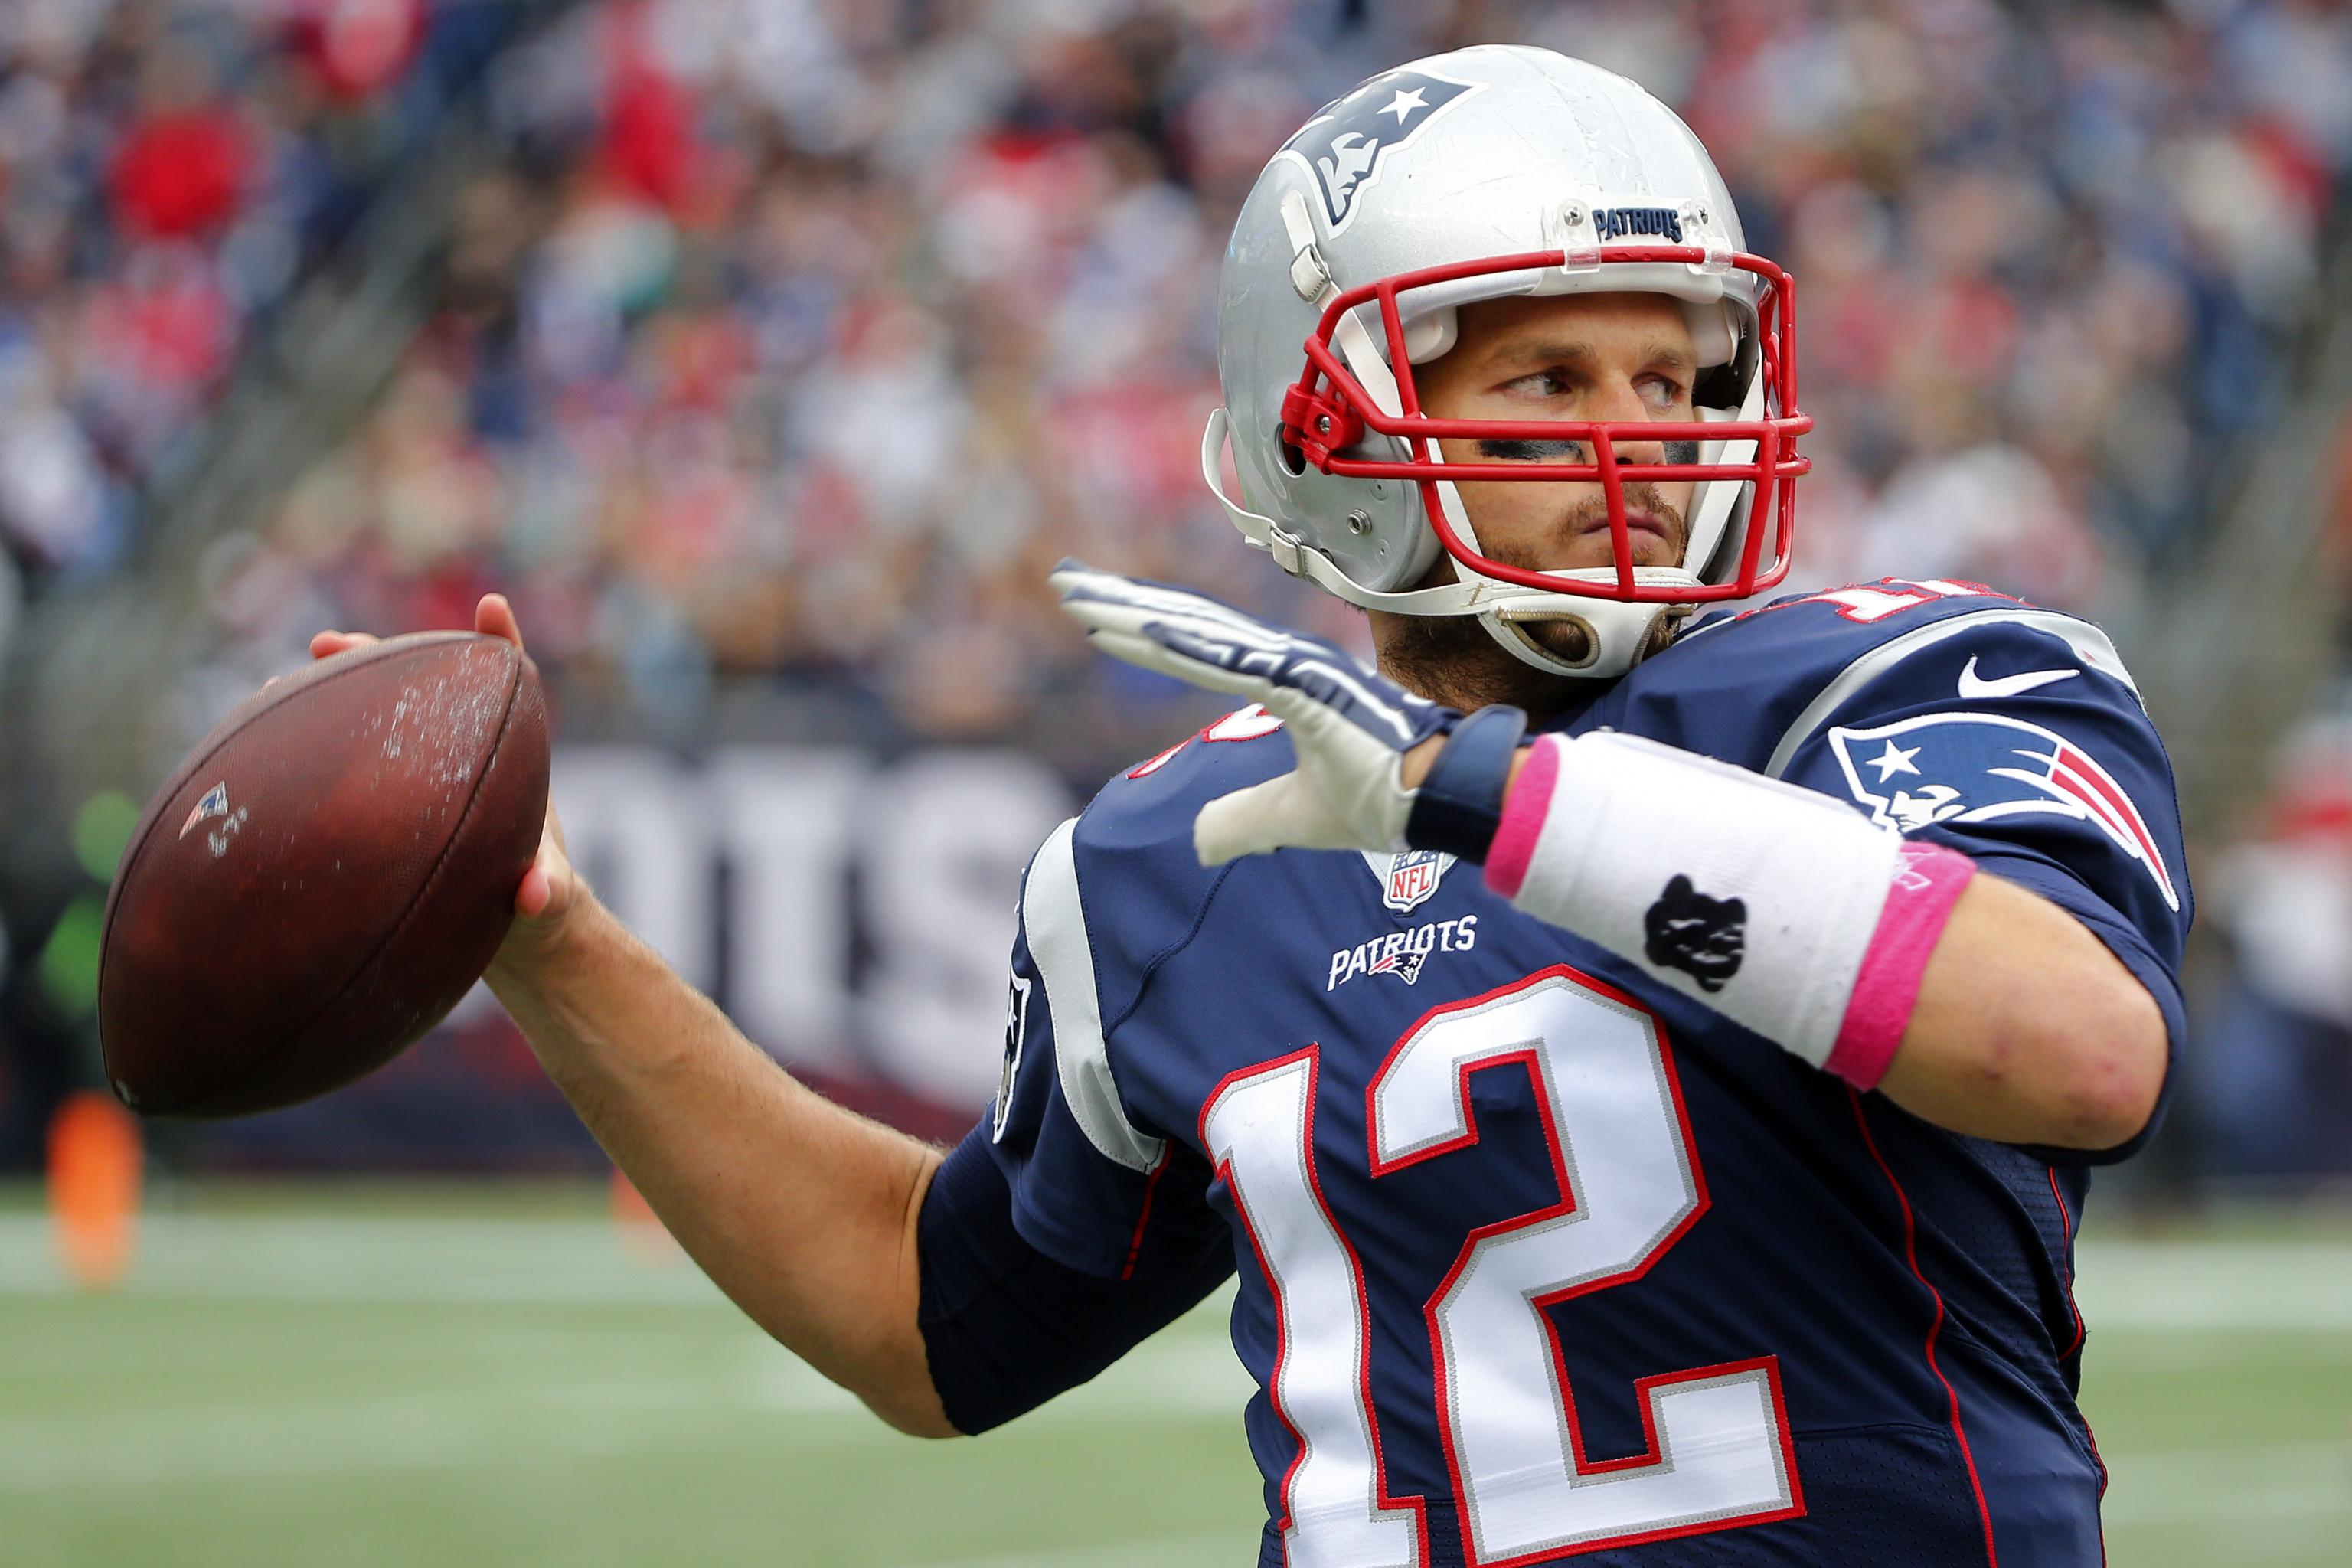 It's not a shock, but Tom Brady has been a dominating QB against